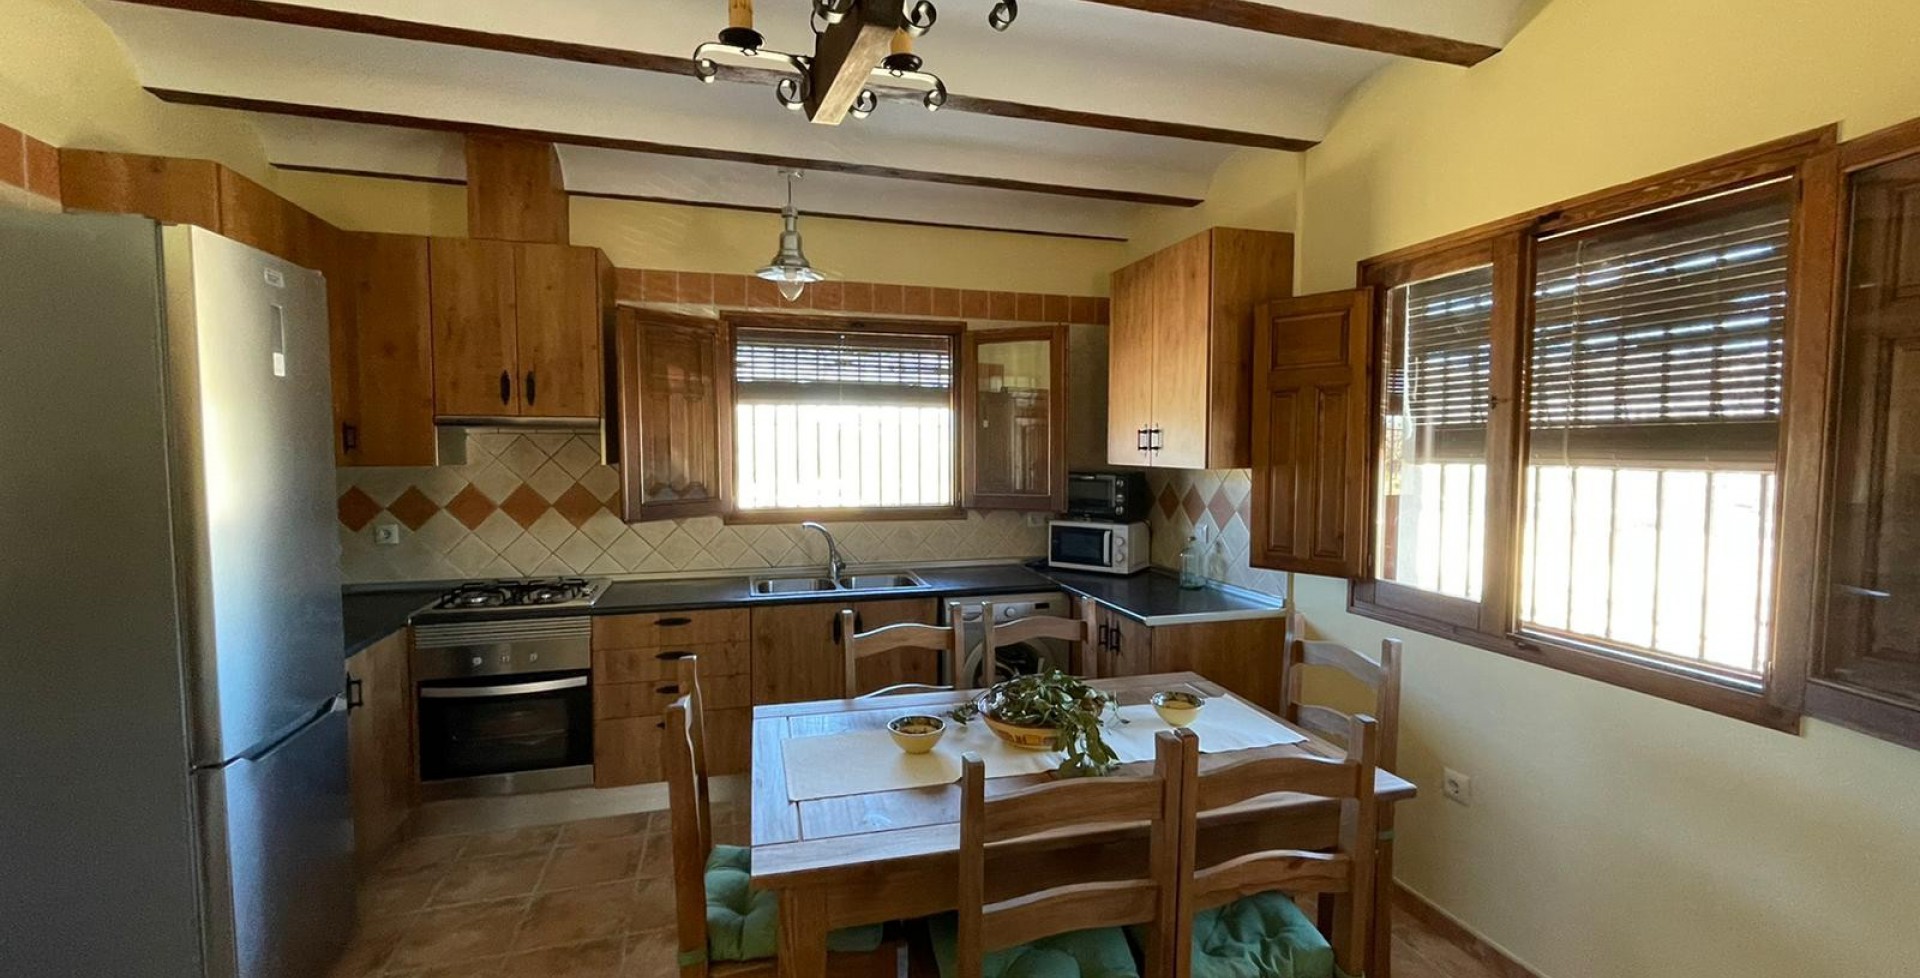 nice detached country house with great design kitchen